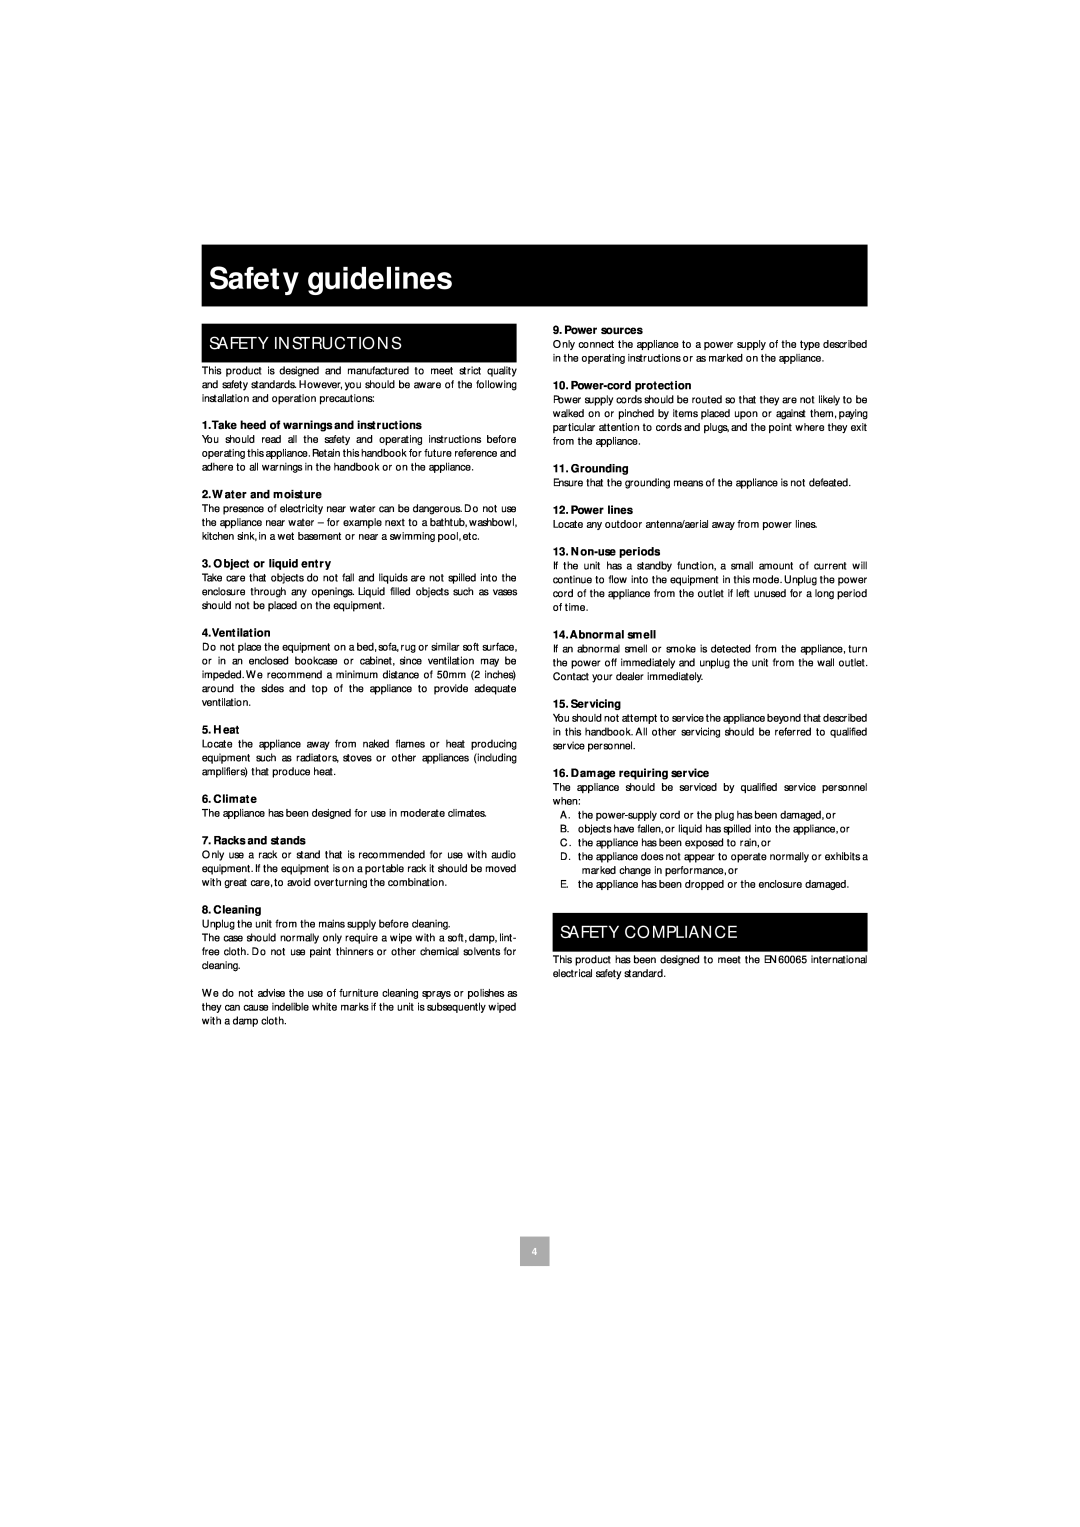 Arcam A32 manual Safety guidelines, Safety Instructions, Safety Compliance 